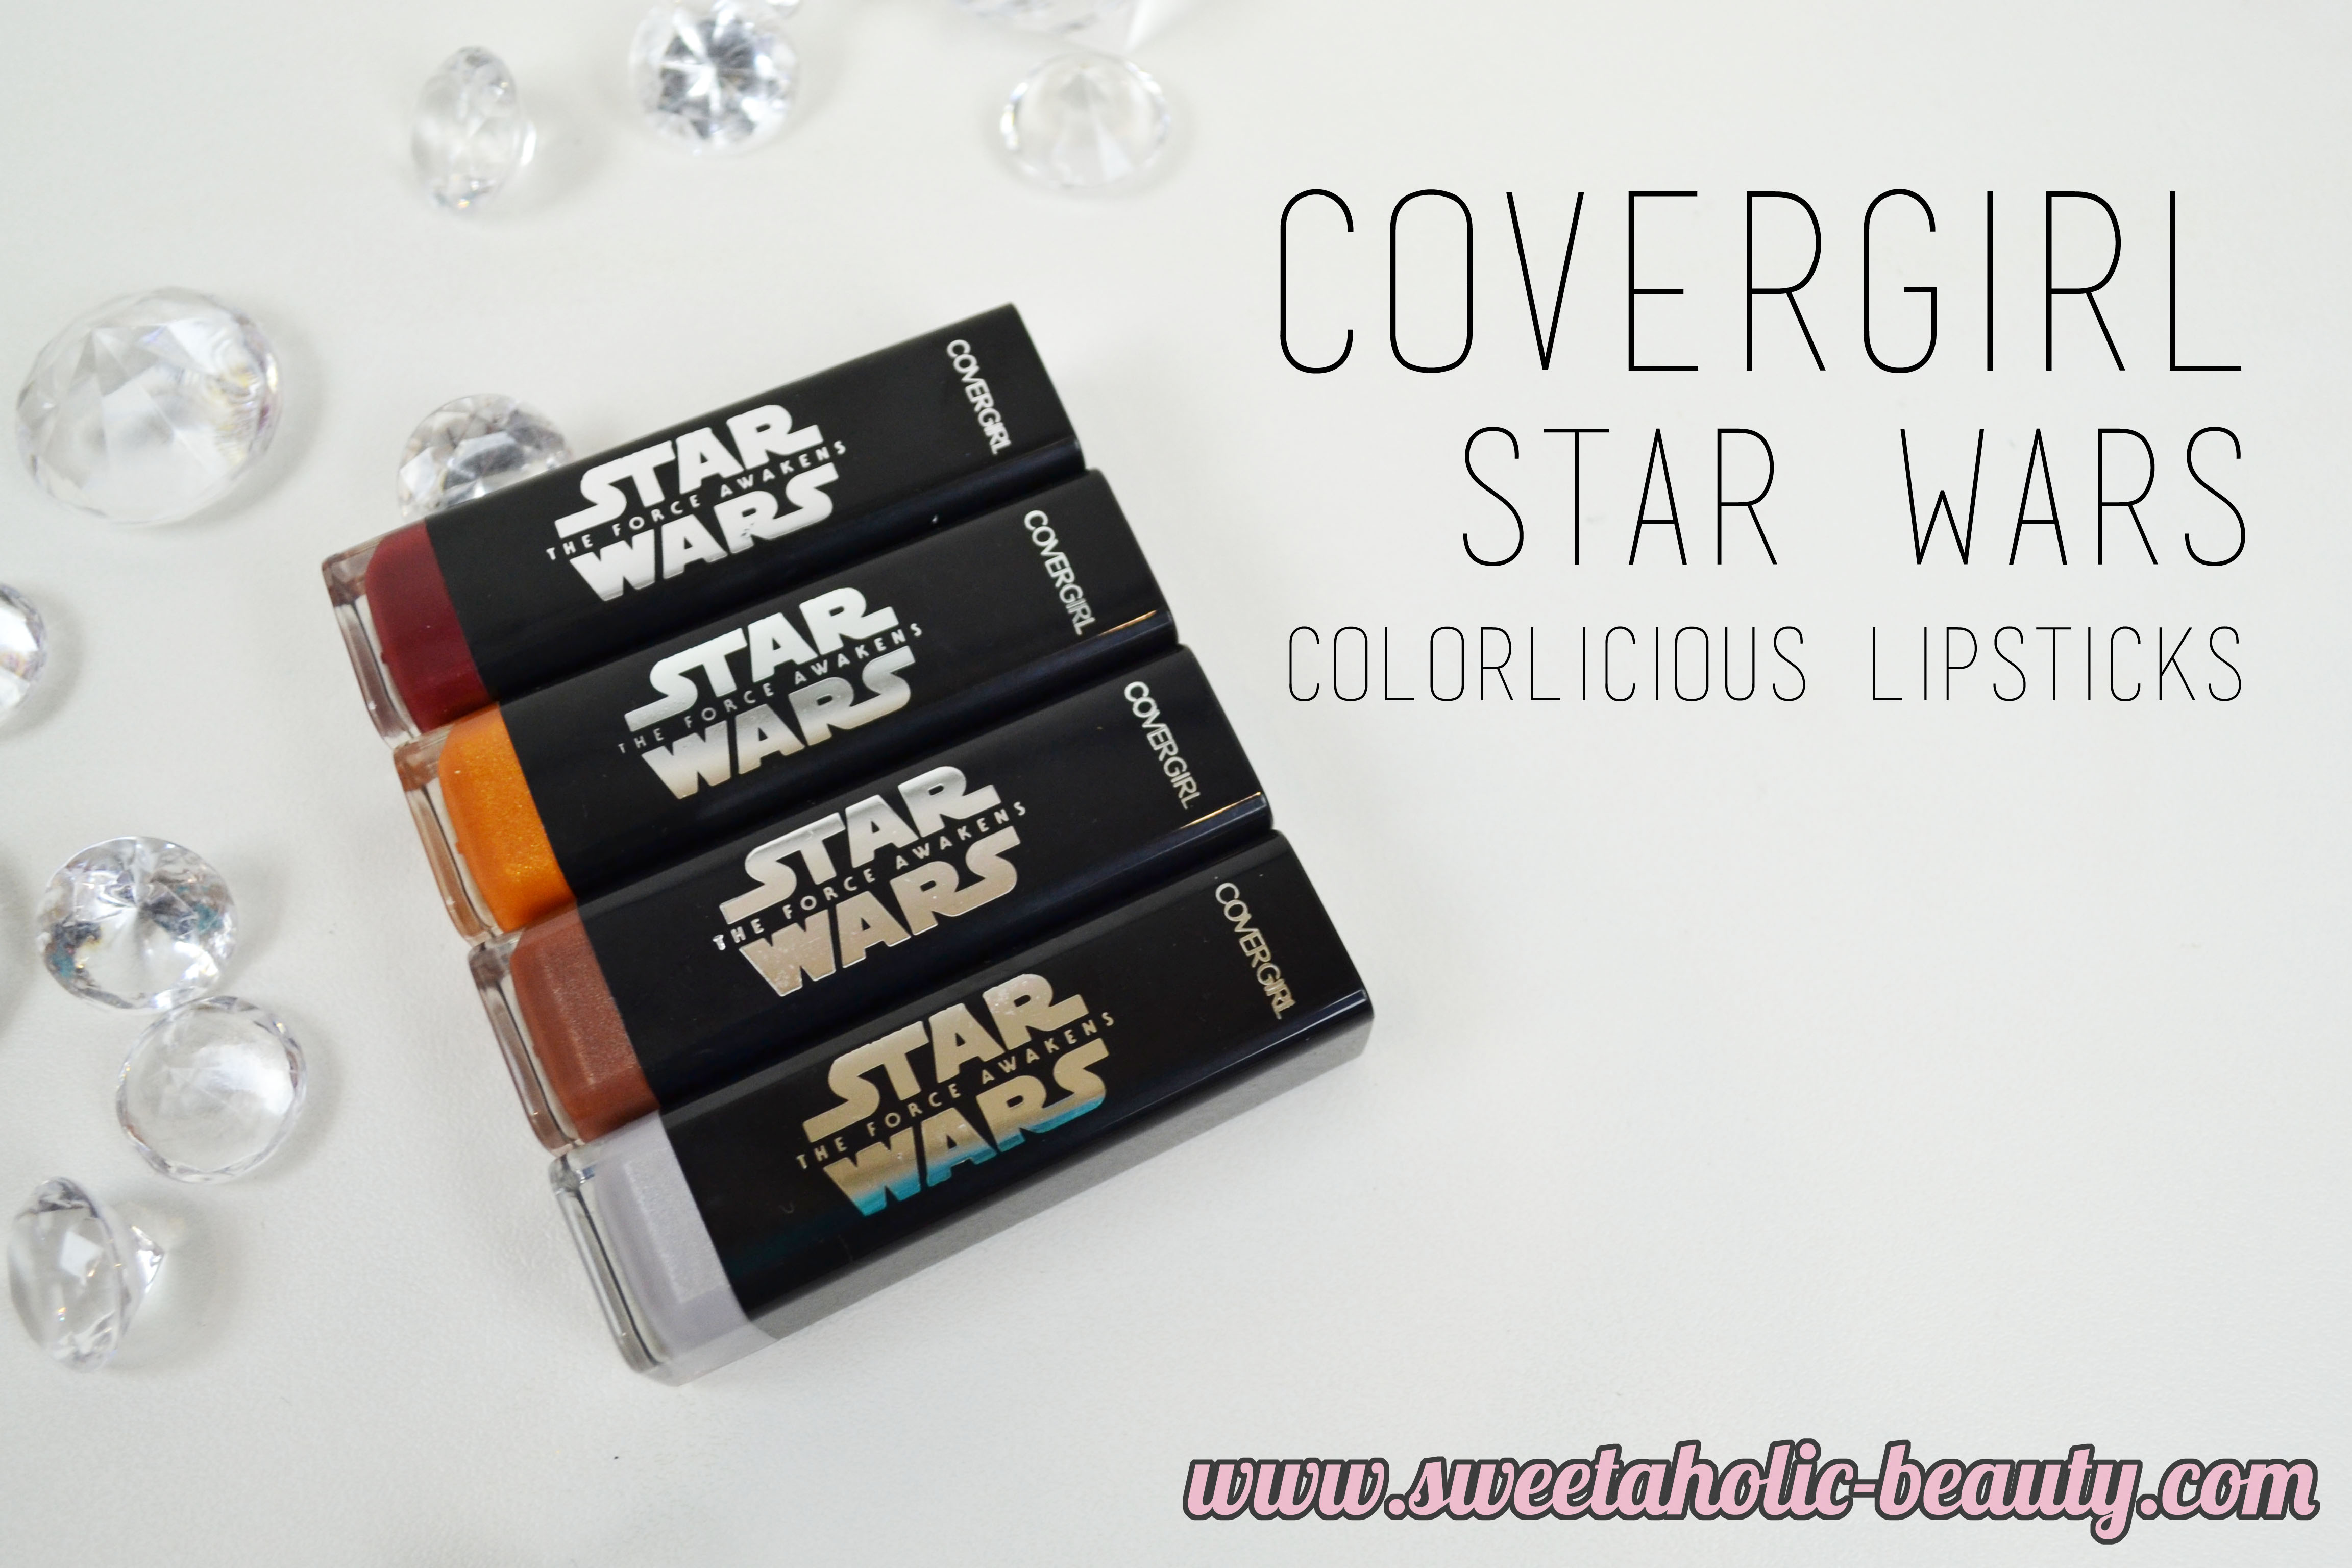 Covergirl Cosmetics Star Wars Colorlicious Lipstick Collection Review & Swatches